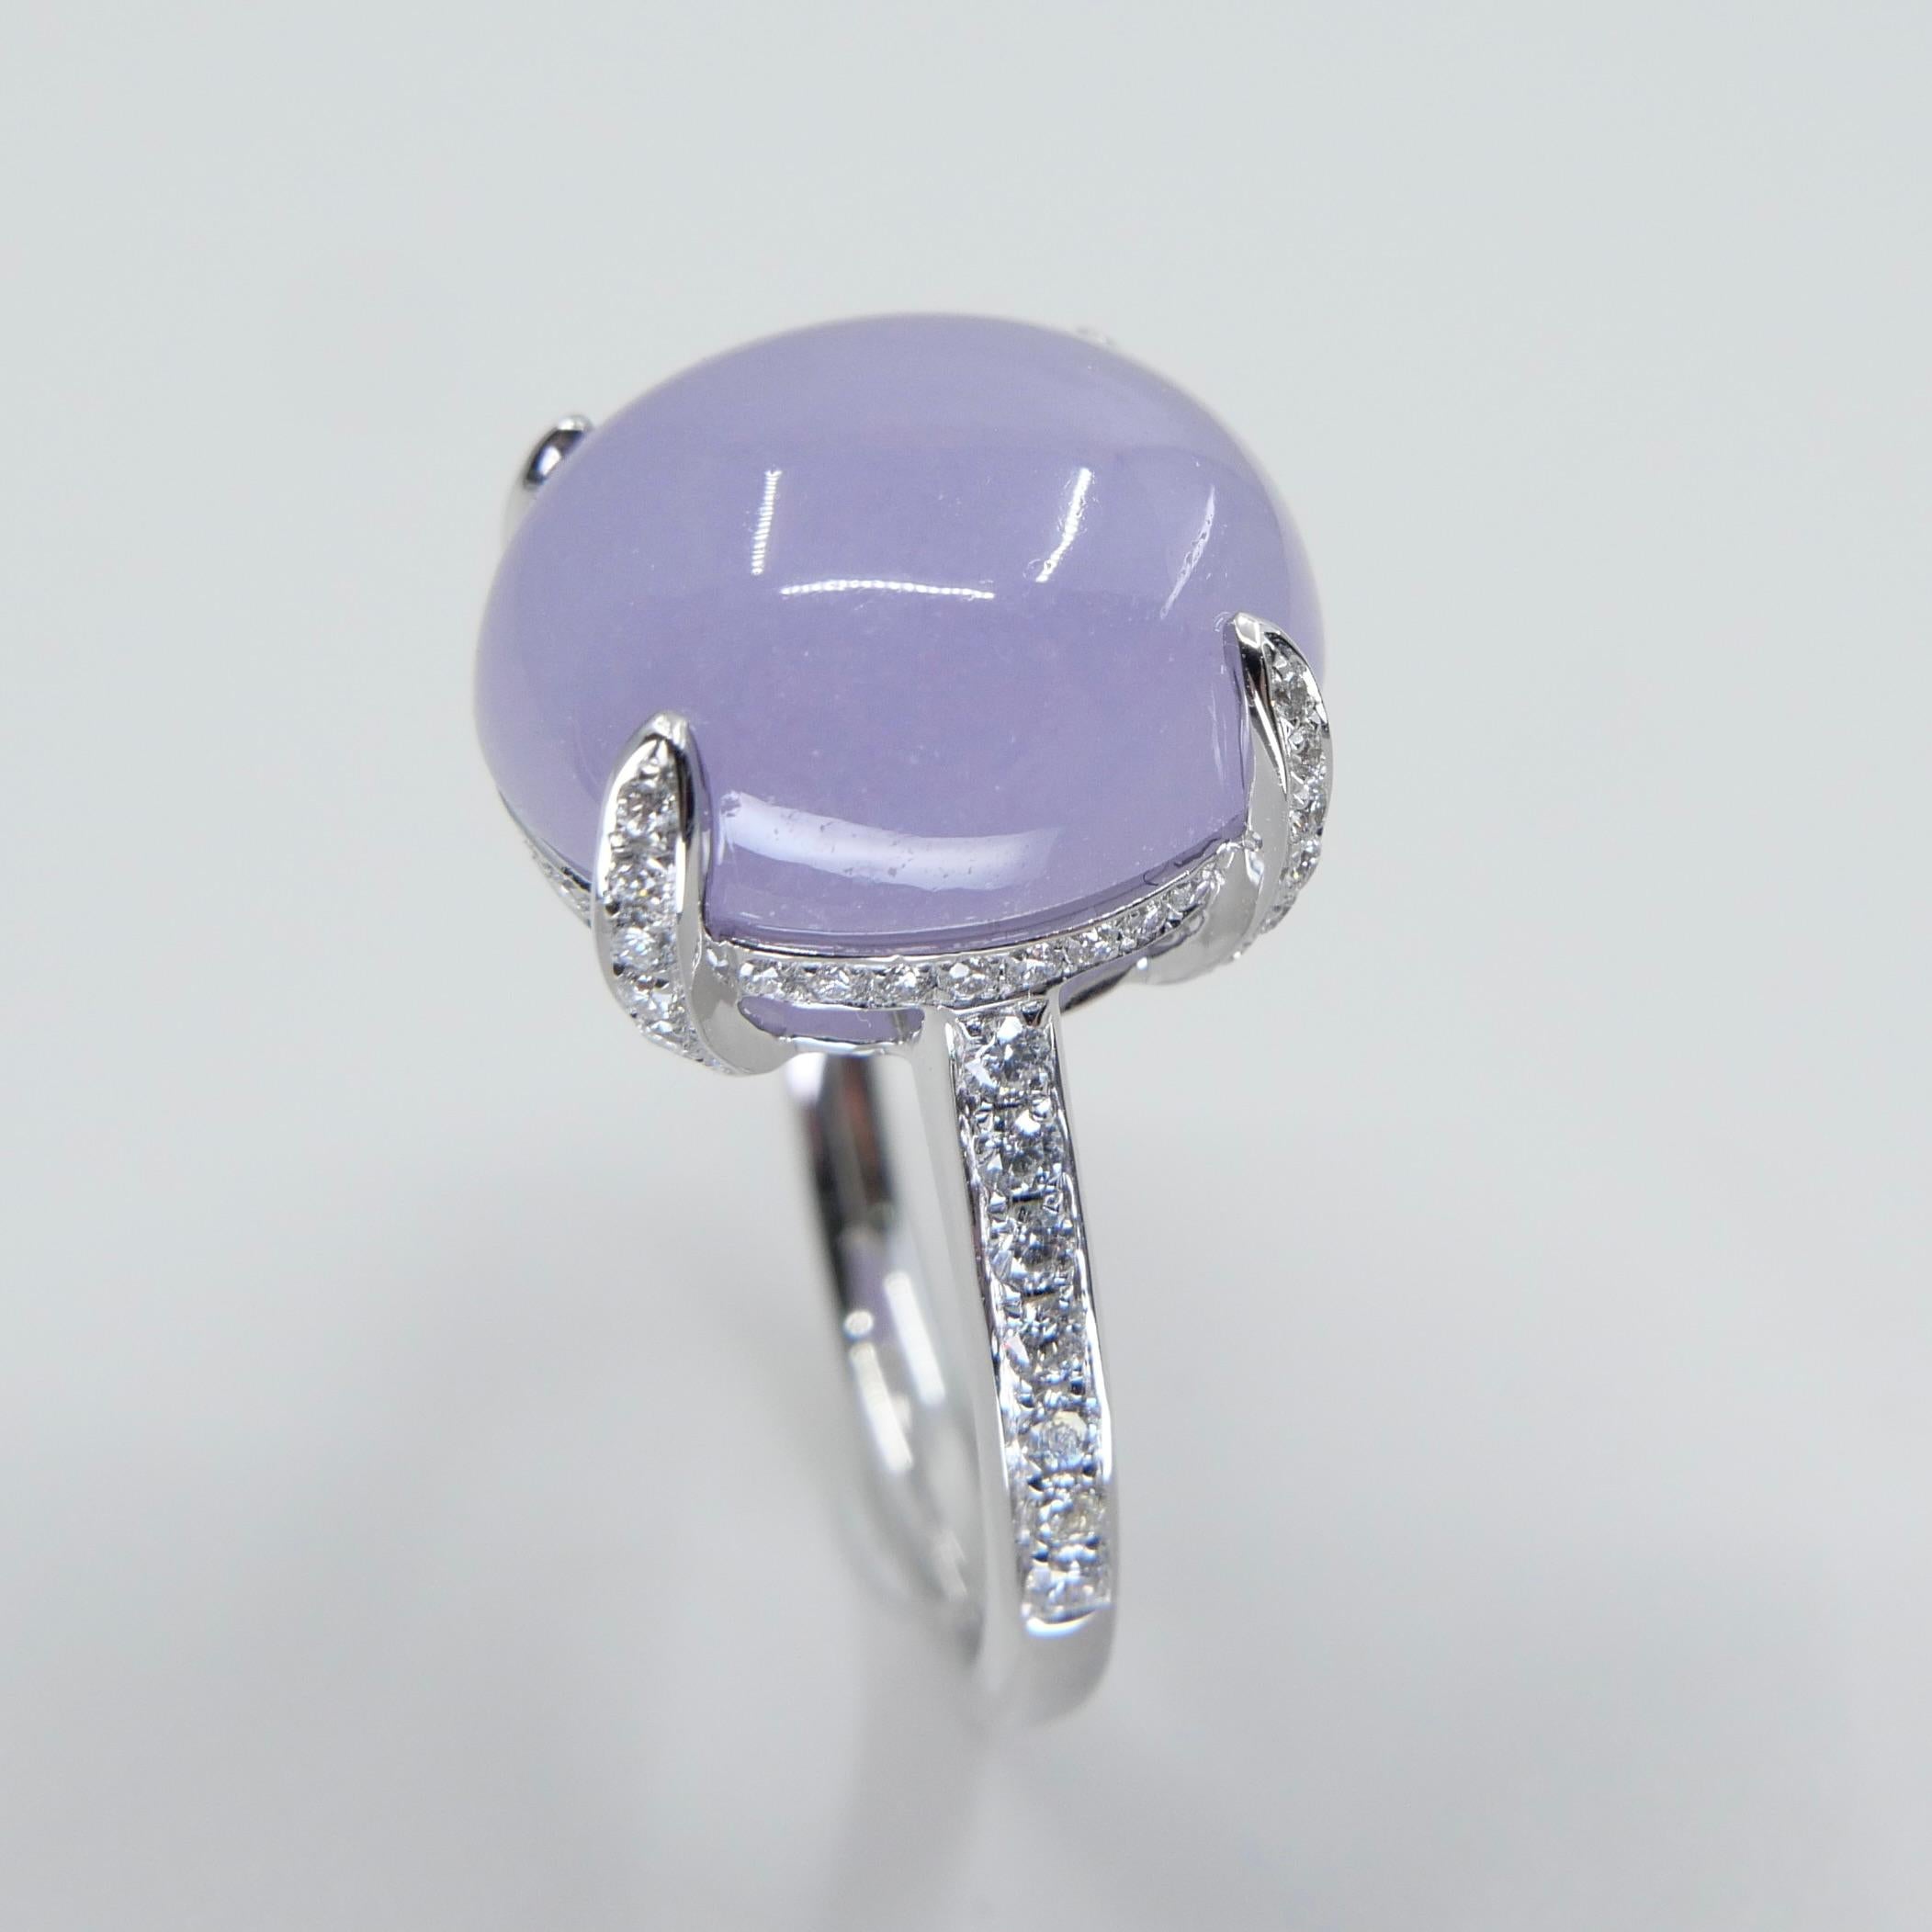 Cabochon Certified 11.36Cts Lavender Jade & Diamond Ring With Hidden halo. Substantial For Sale